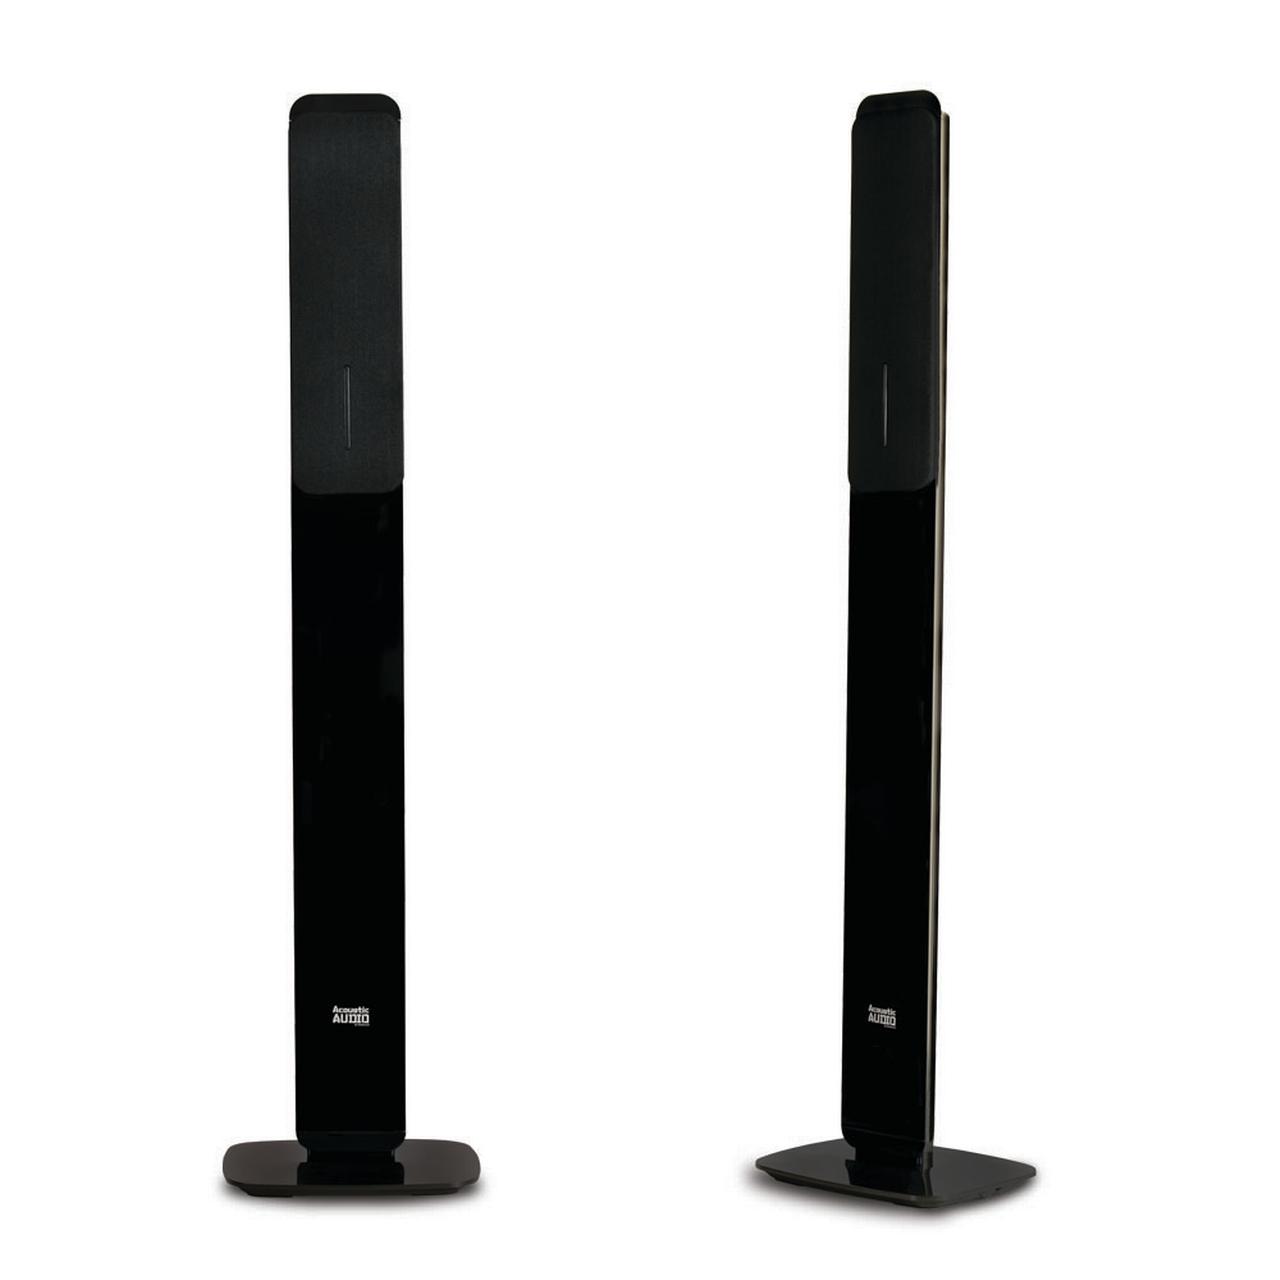 Acoustic Audio AAT5005 Bluetooth Tower 5.1 Home Theater Speaker System with Digital Optical Input and 8" Powered Subwoofer - image 3 of 6